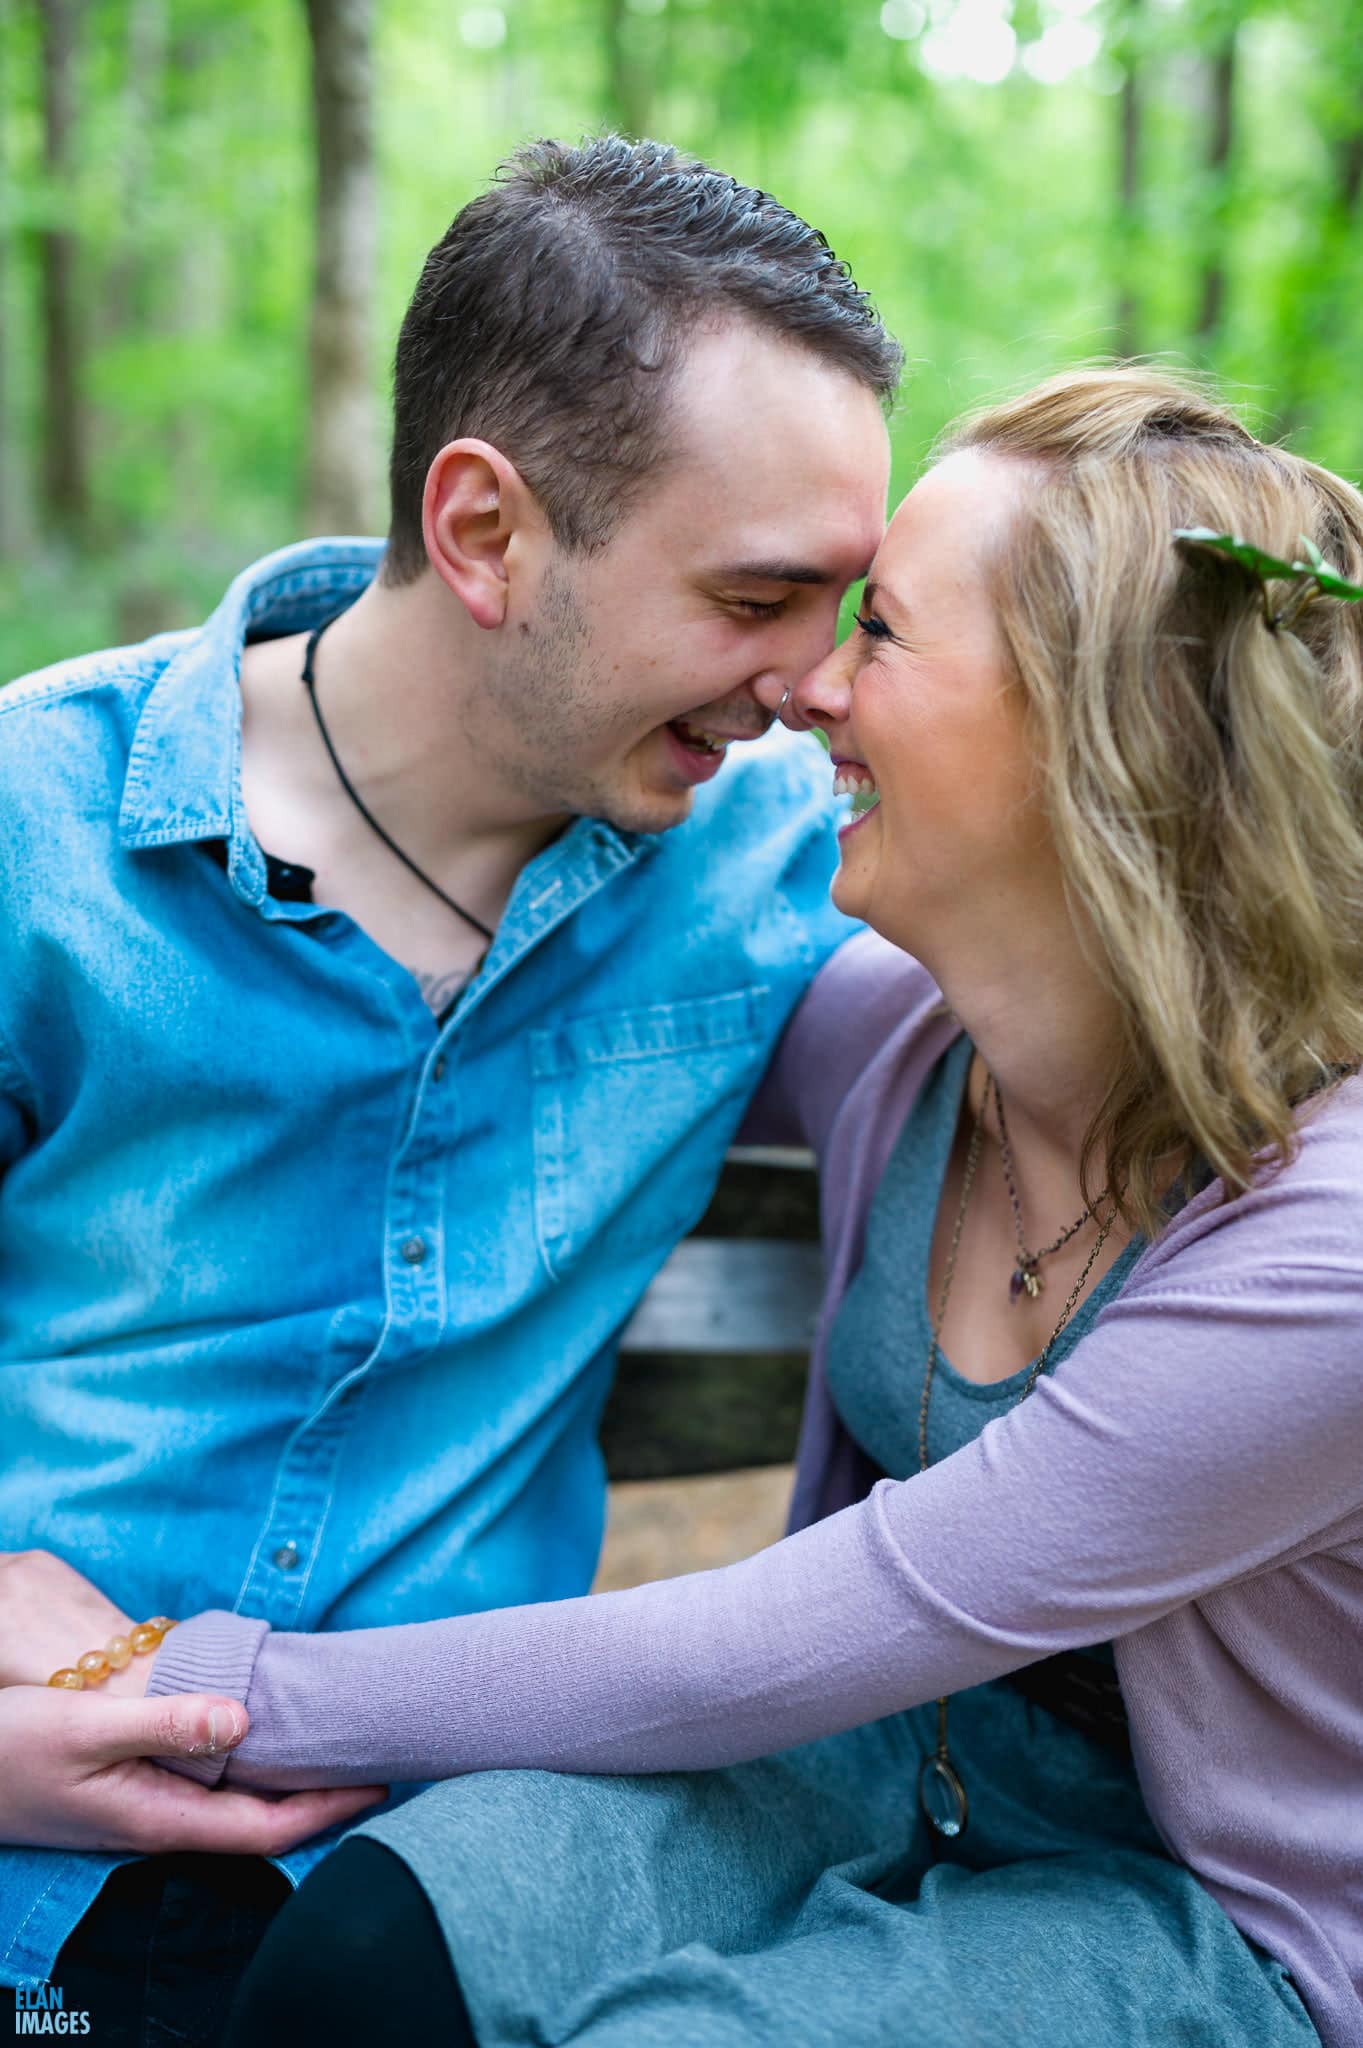 Engagement Photo Shoot in the Bluebell Woods near Bristol 47